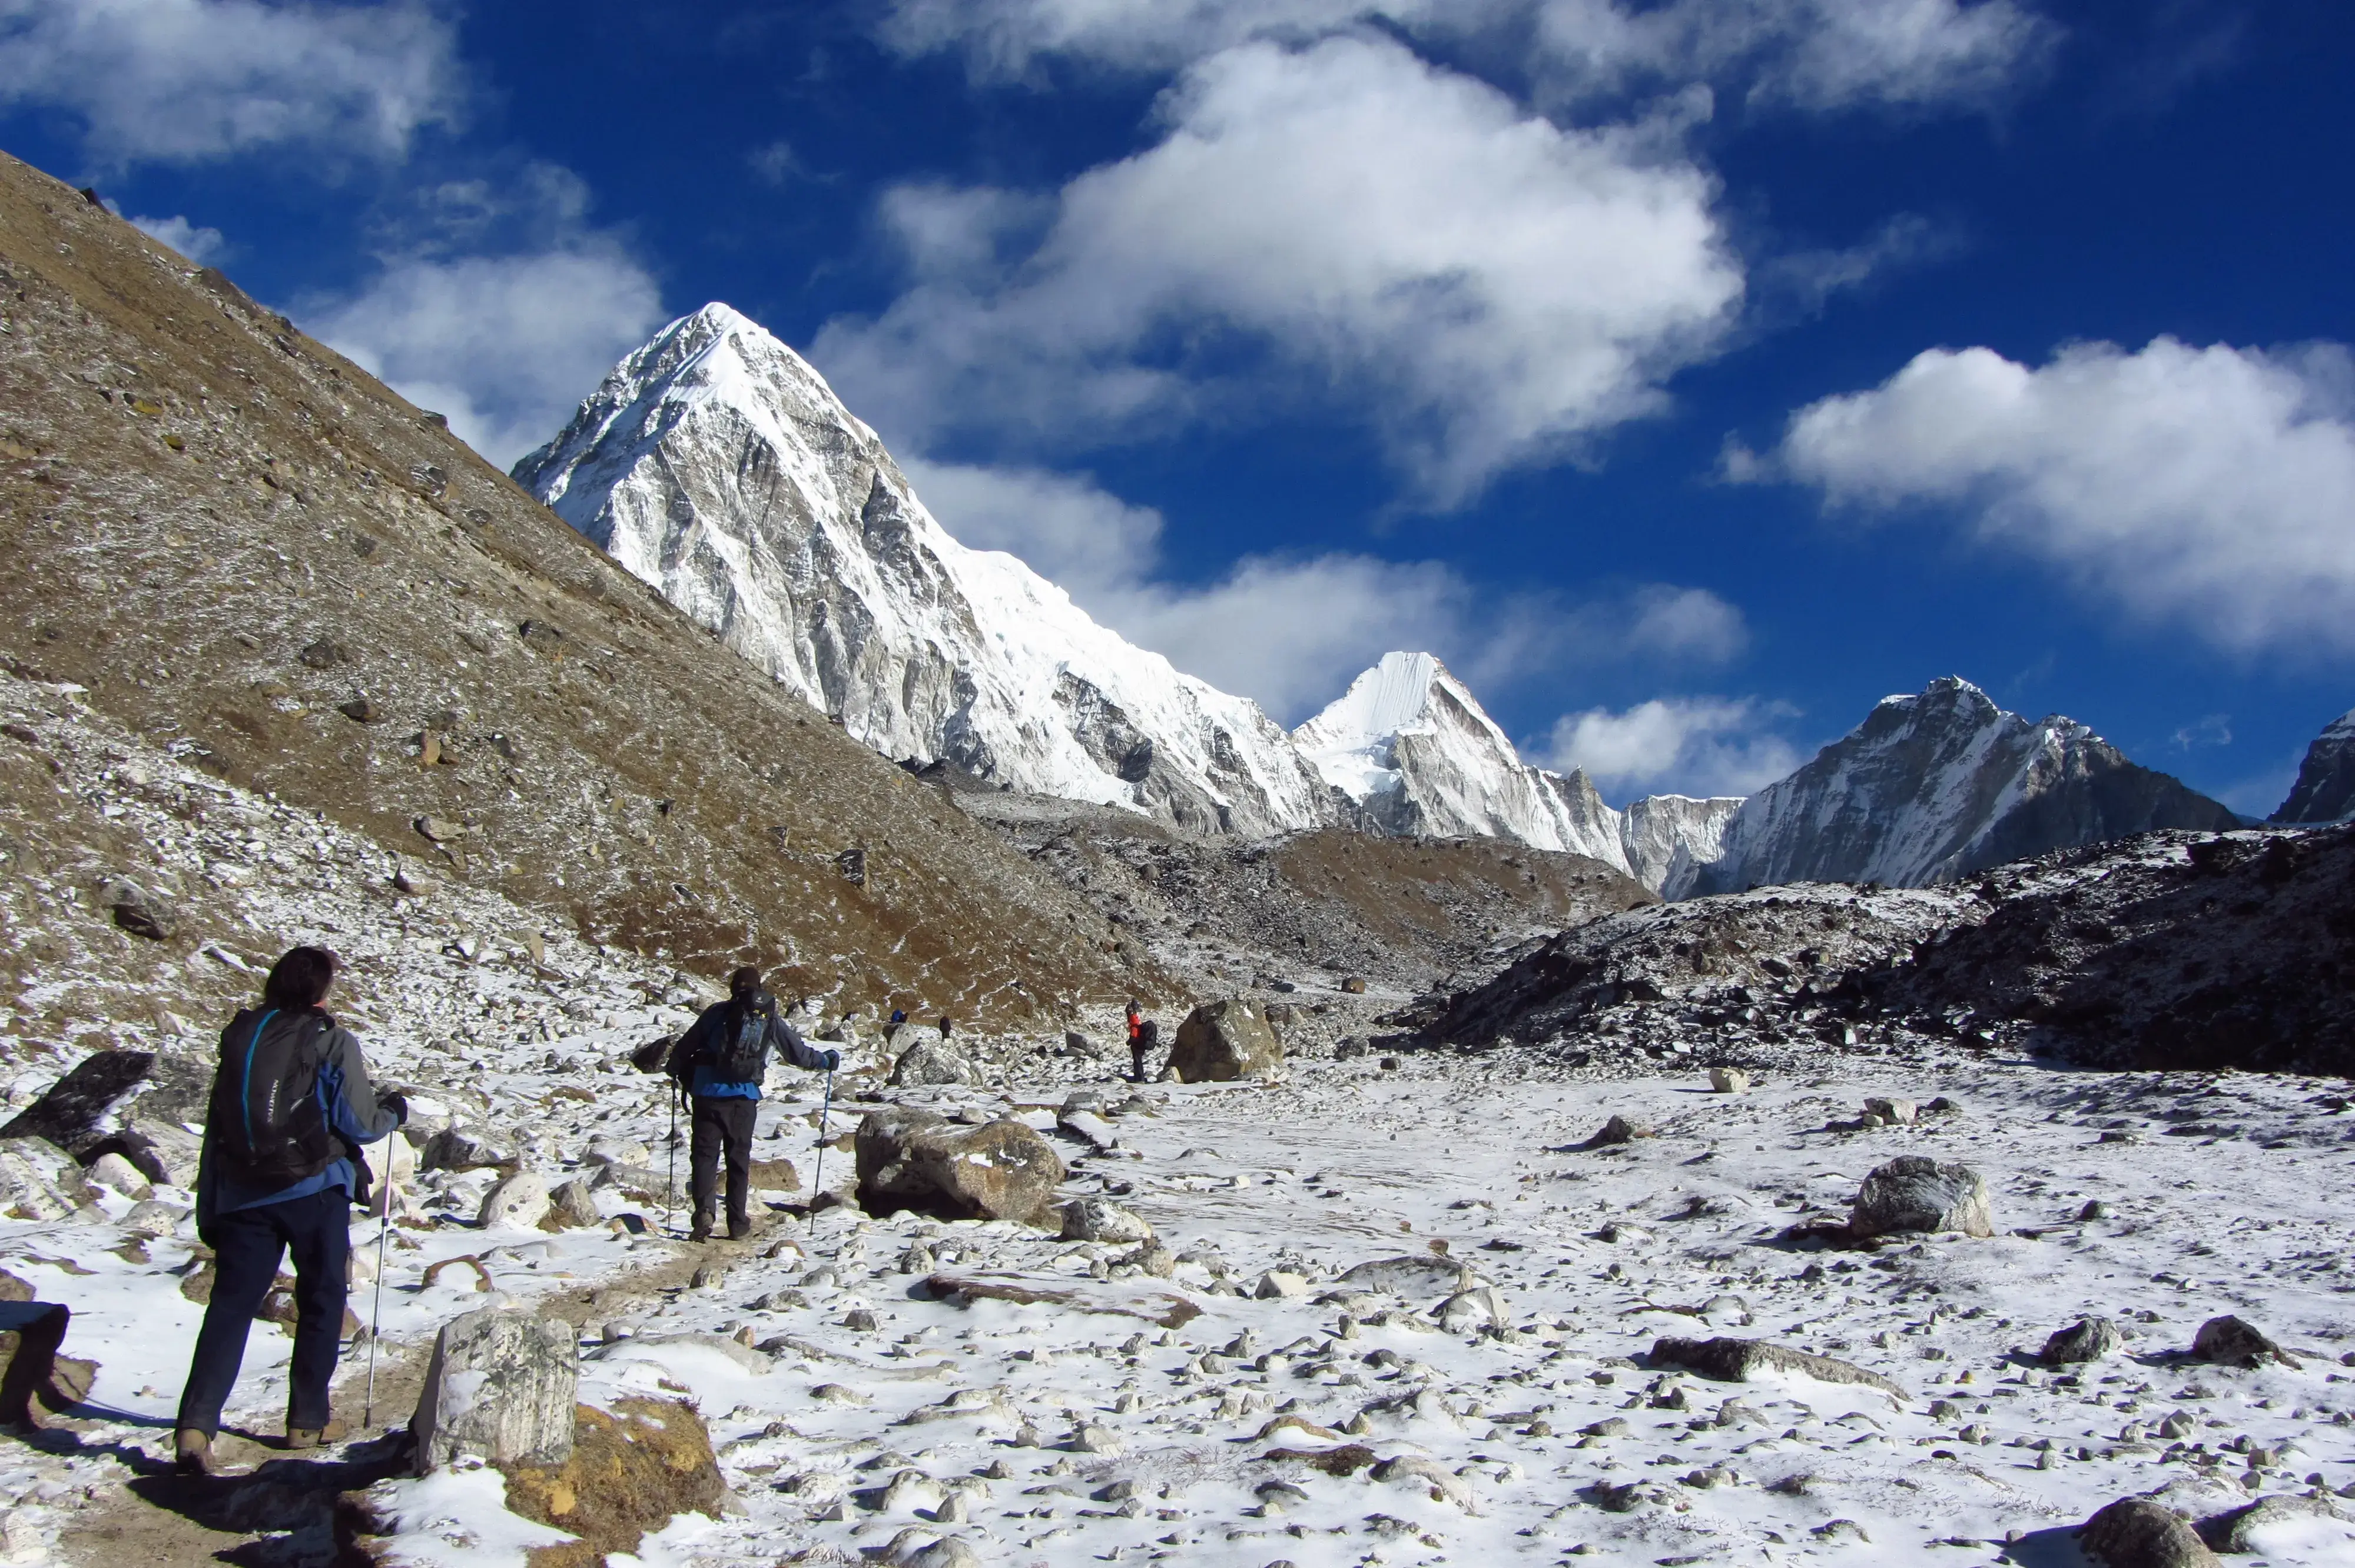 Everest Base Camp Trek with Group - Join Group Trekking to Everest Base Camp